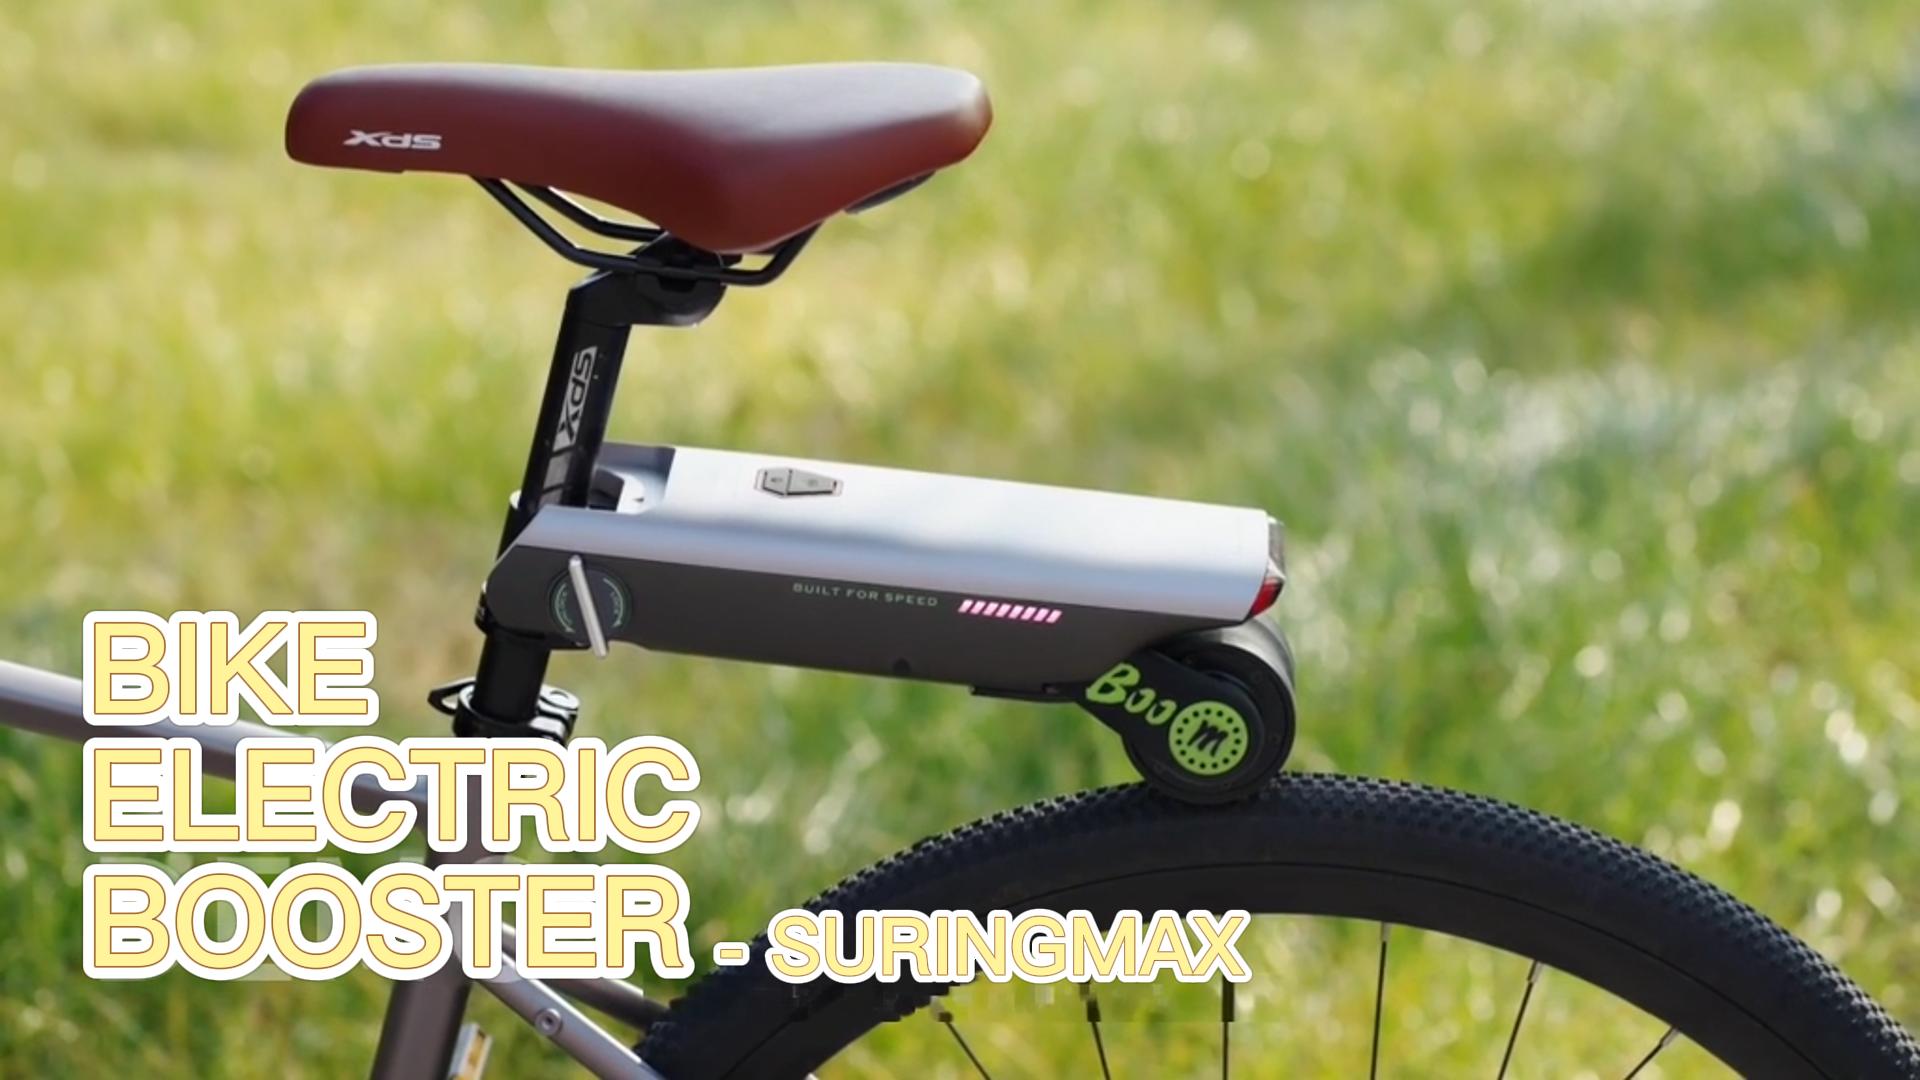 SURINGMAX Bicycle Electric Booter